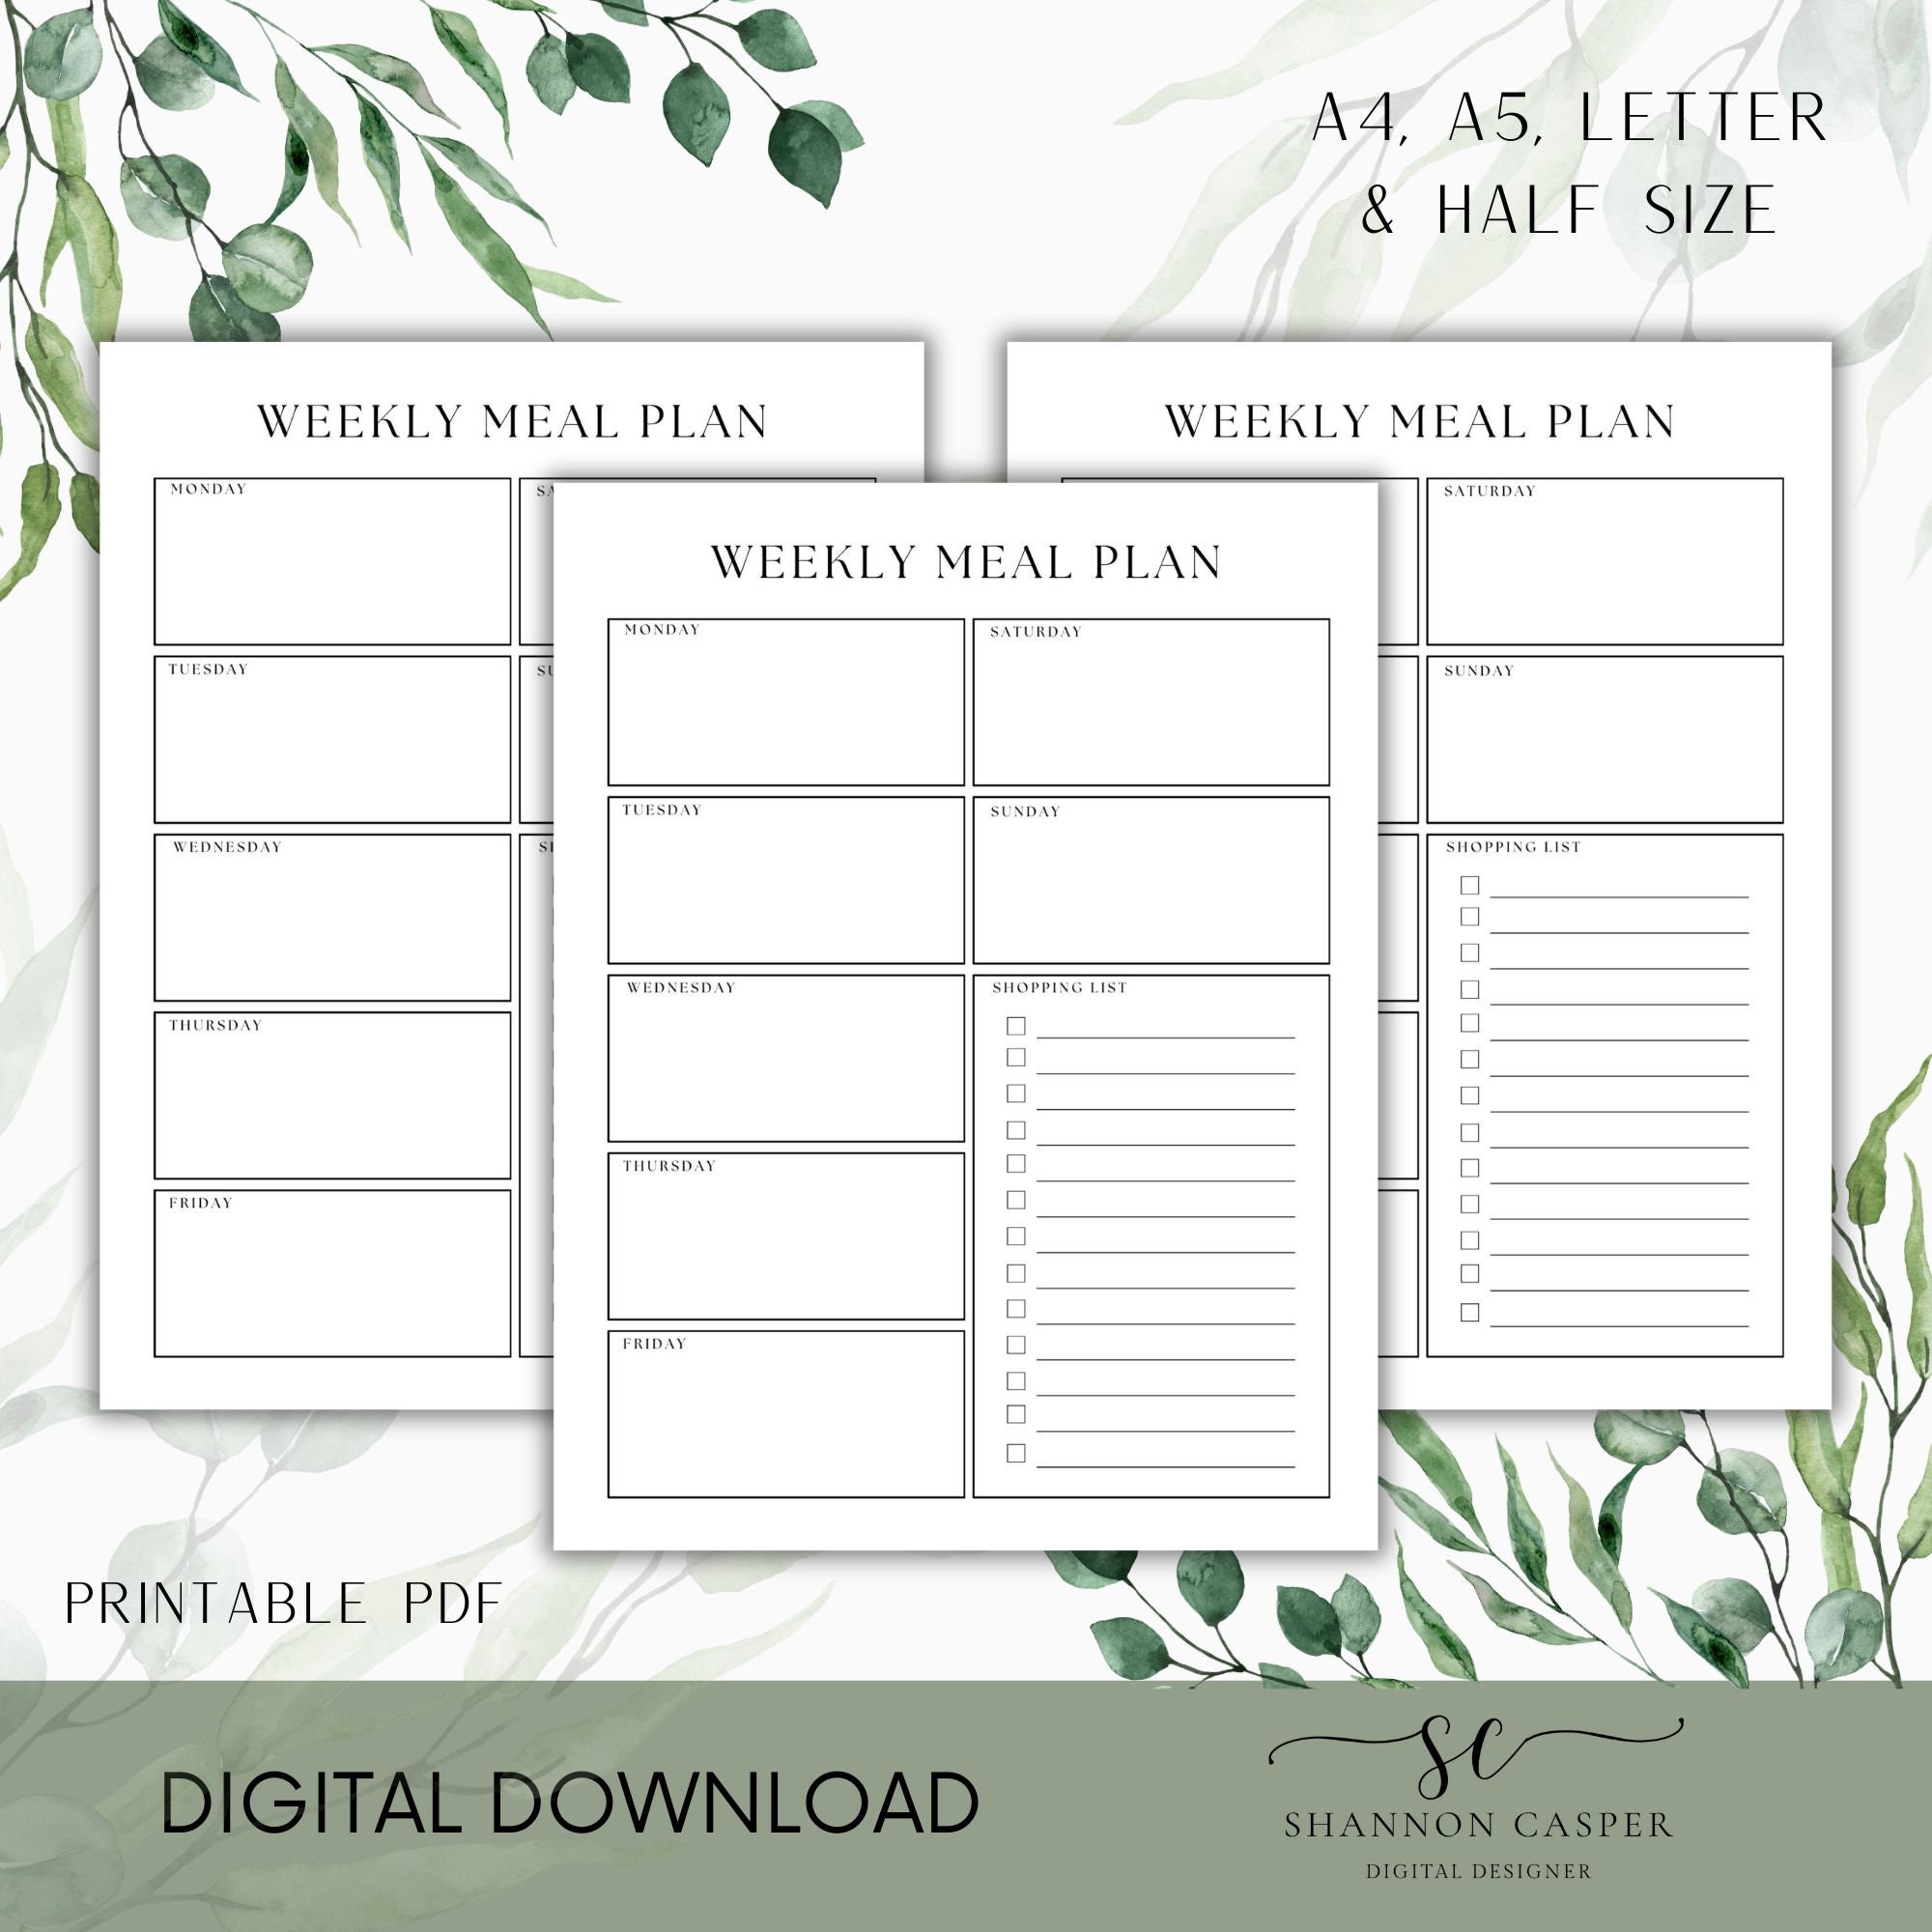 Spice Jar Pantry Labels with 5 Borders Graphic by Shannon Casper